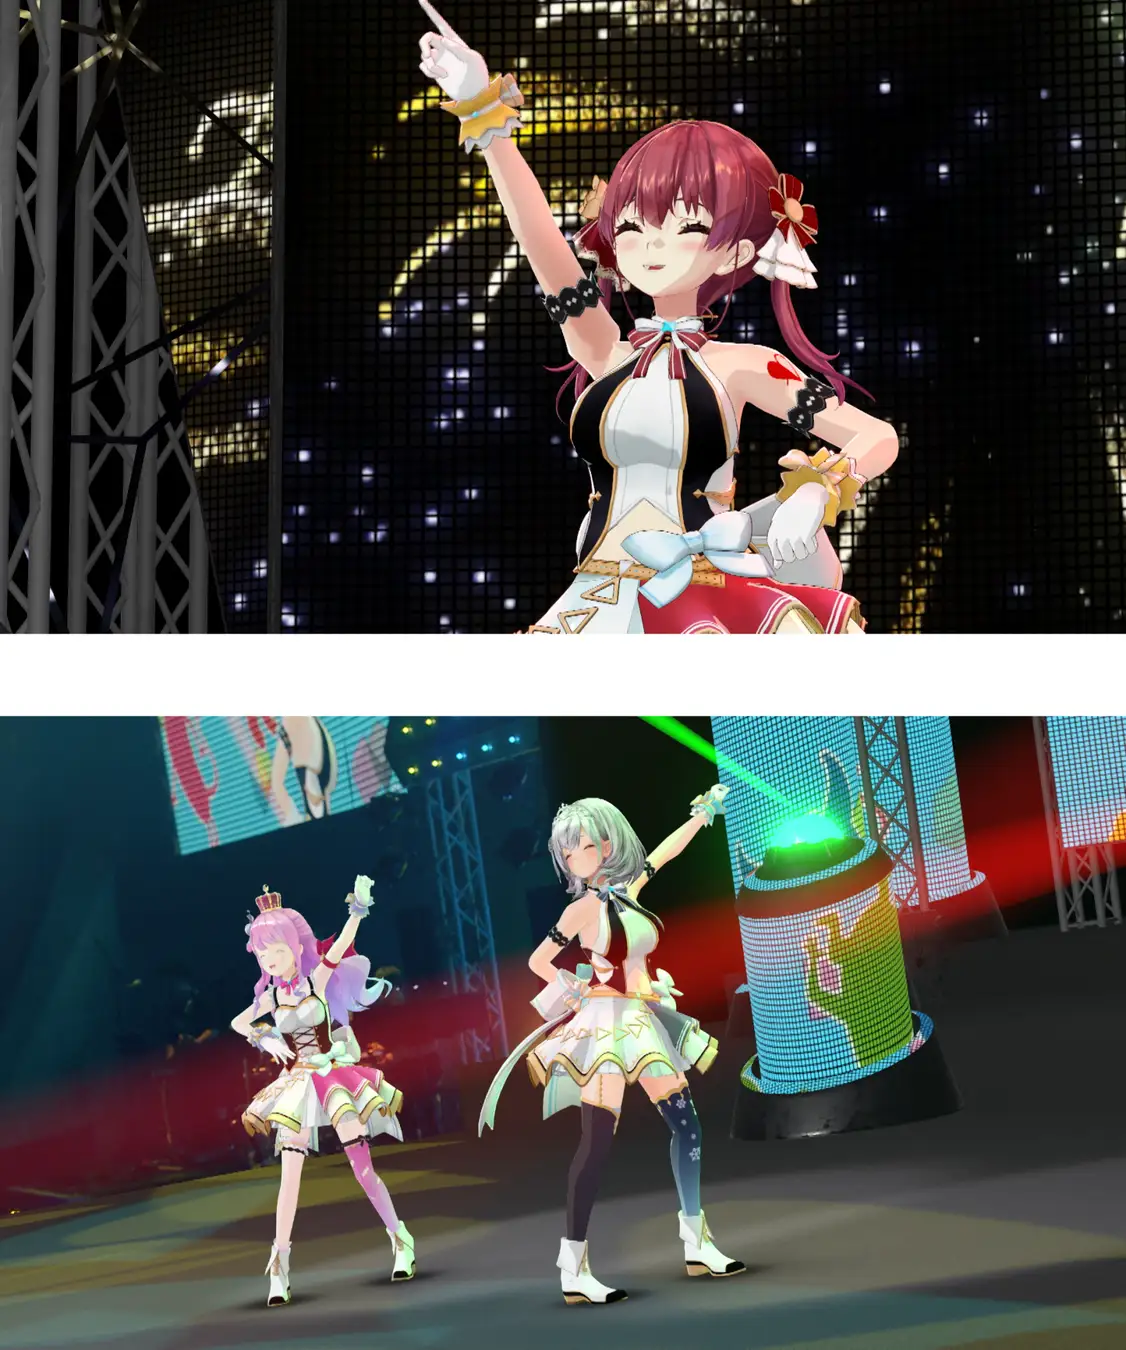 Hololive 3rd Fes Link Your Wish Supported By ヴァイスシュヴァルツ イベント情報 Hololive ホロライブ 公式サイト